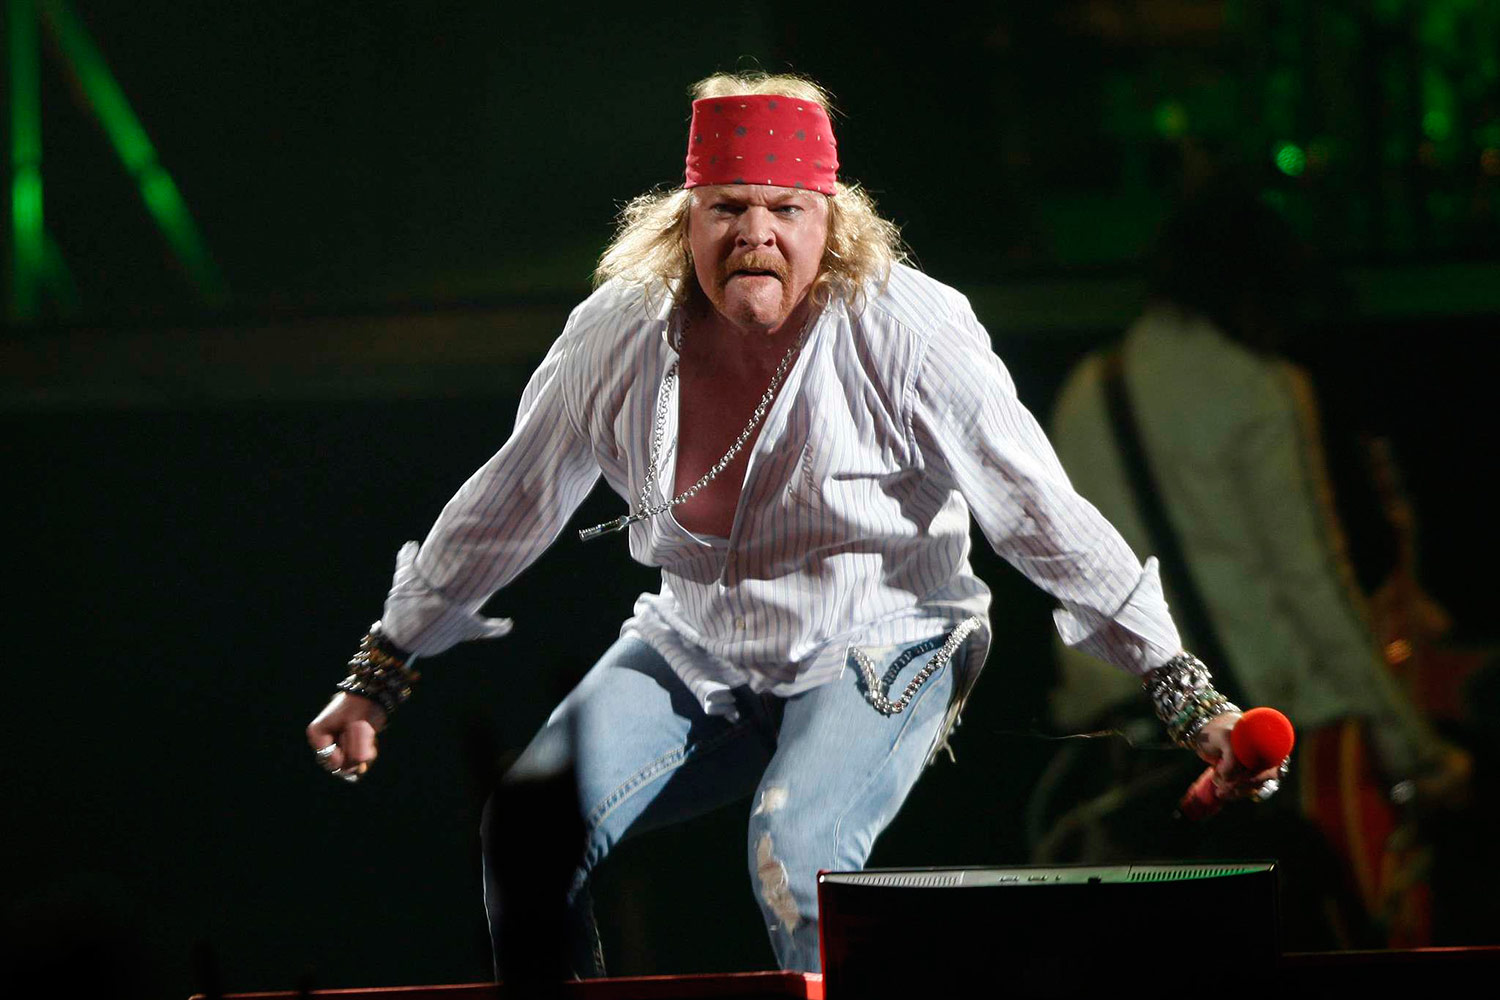 axl rose wants his fat memes off the internet